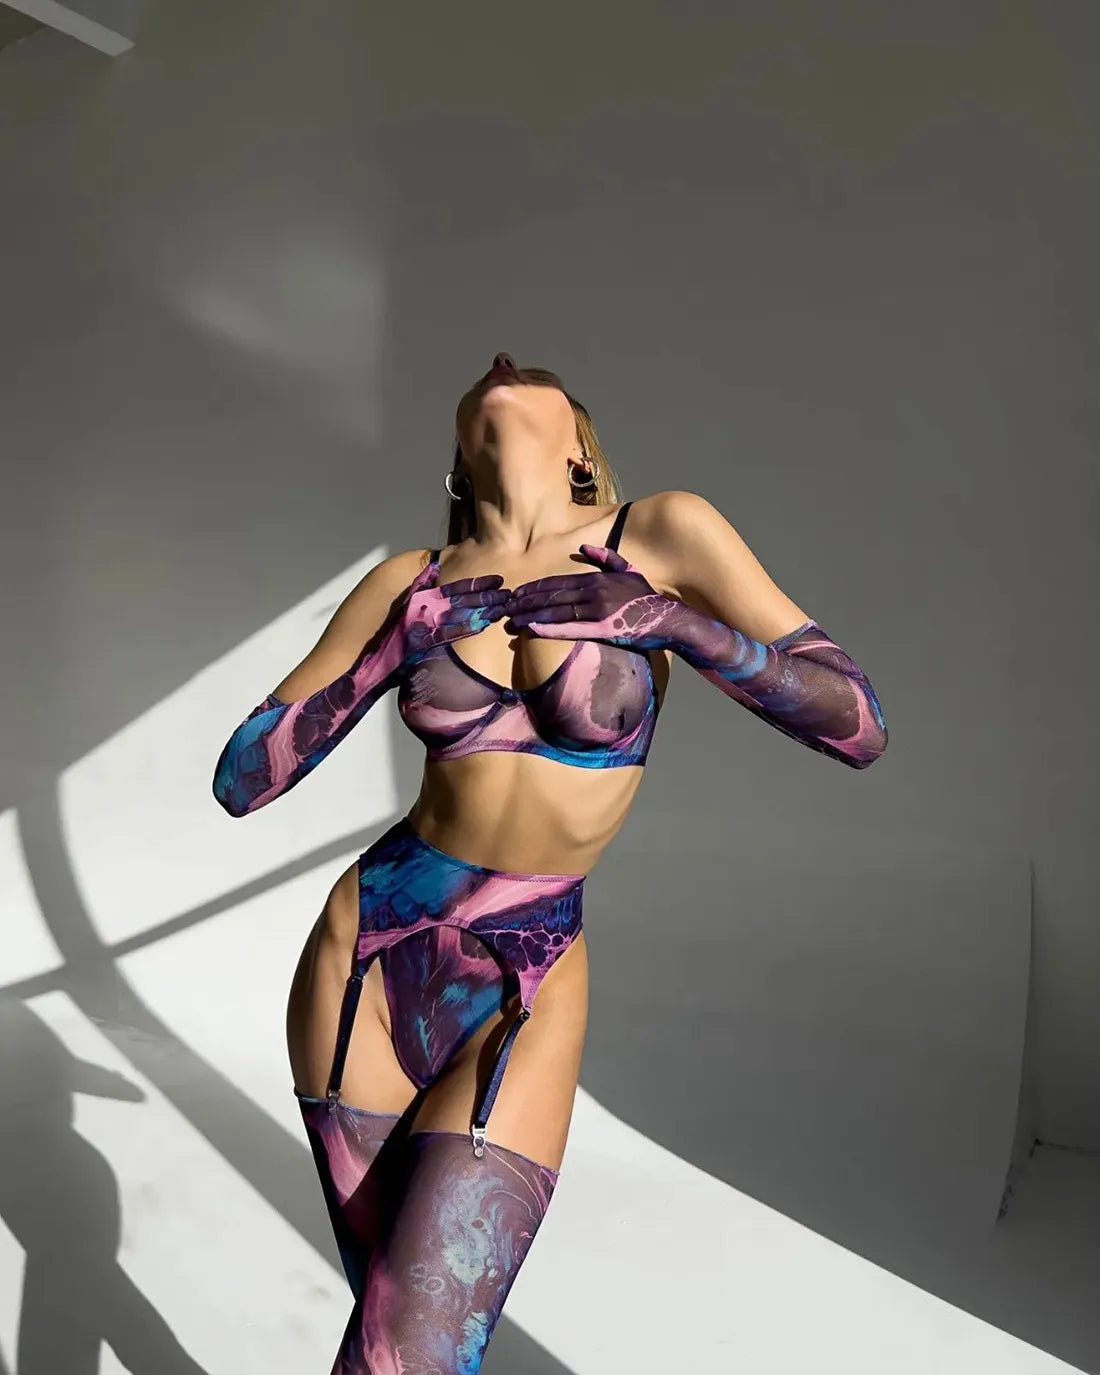  "Vivid Purple CyberCrime Hentai Ensemble - Make a bold fashion statement with this vibrant purple outfit. Asian tradition meets contemporary allure. Shop now for unique style."